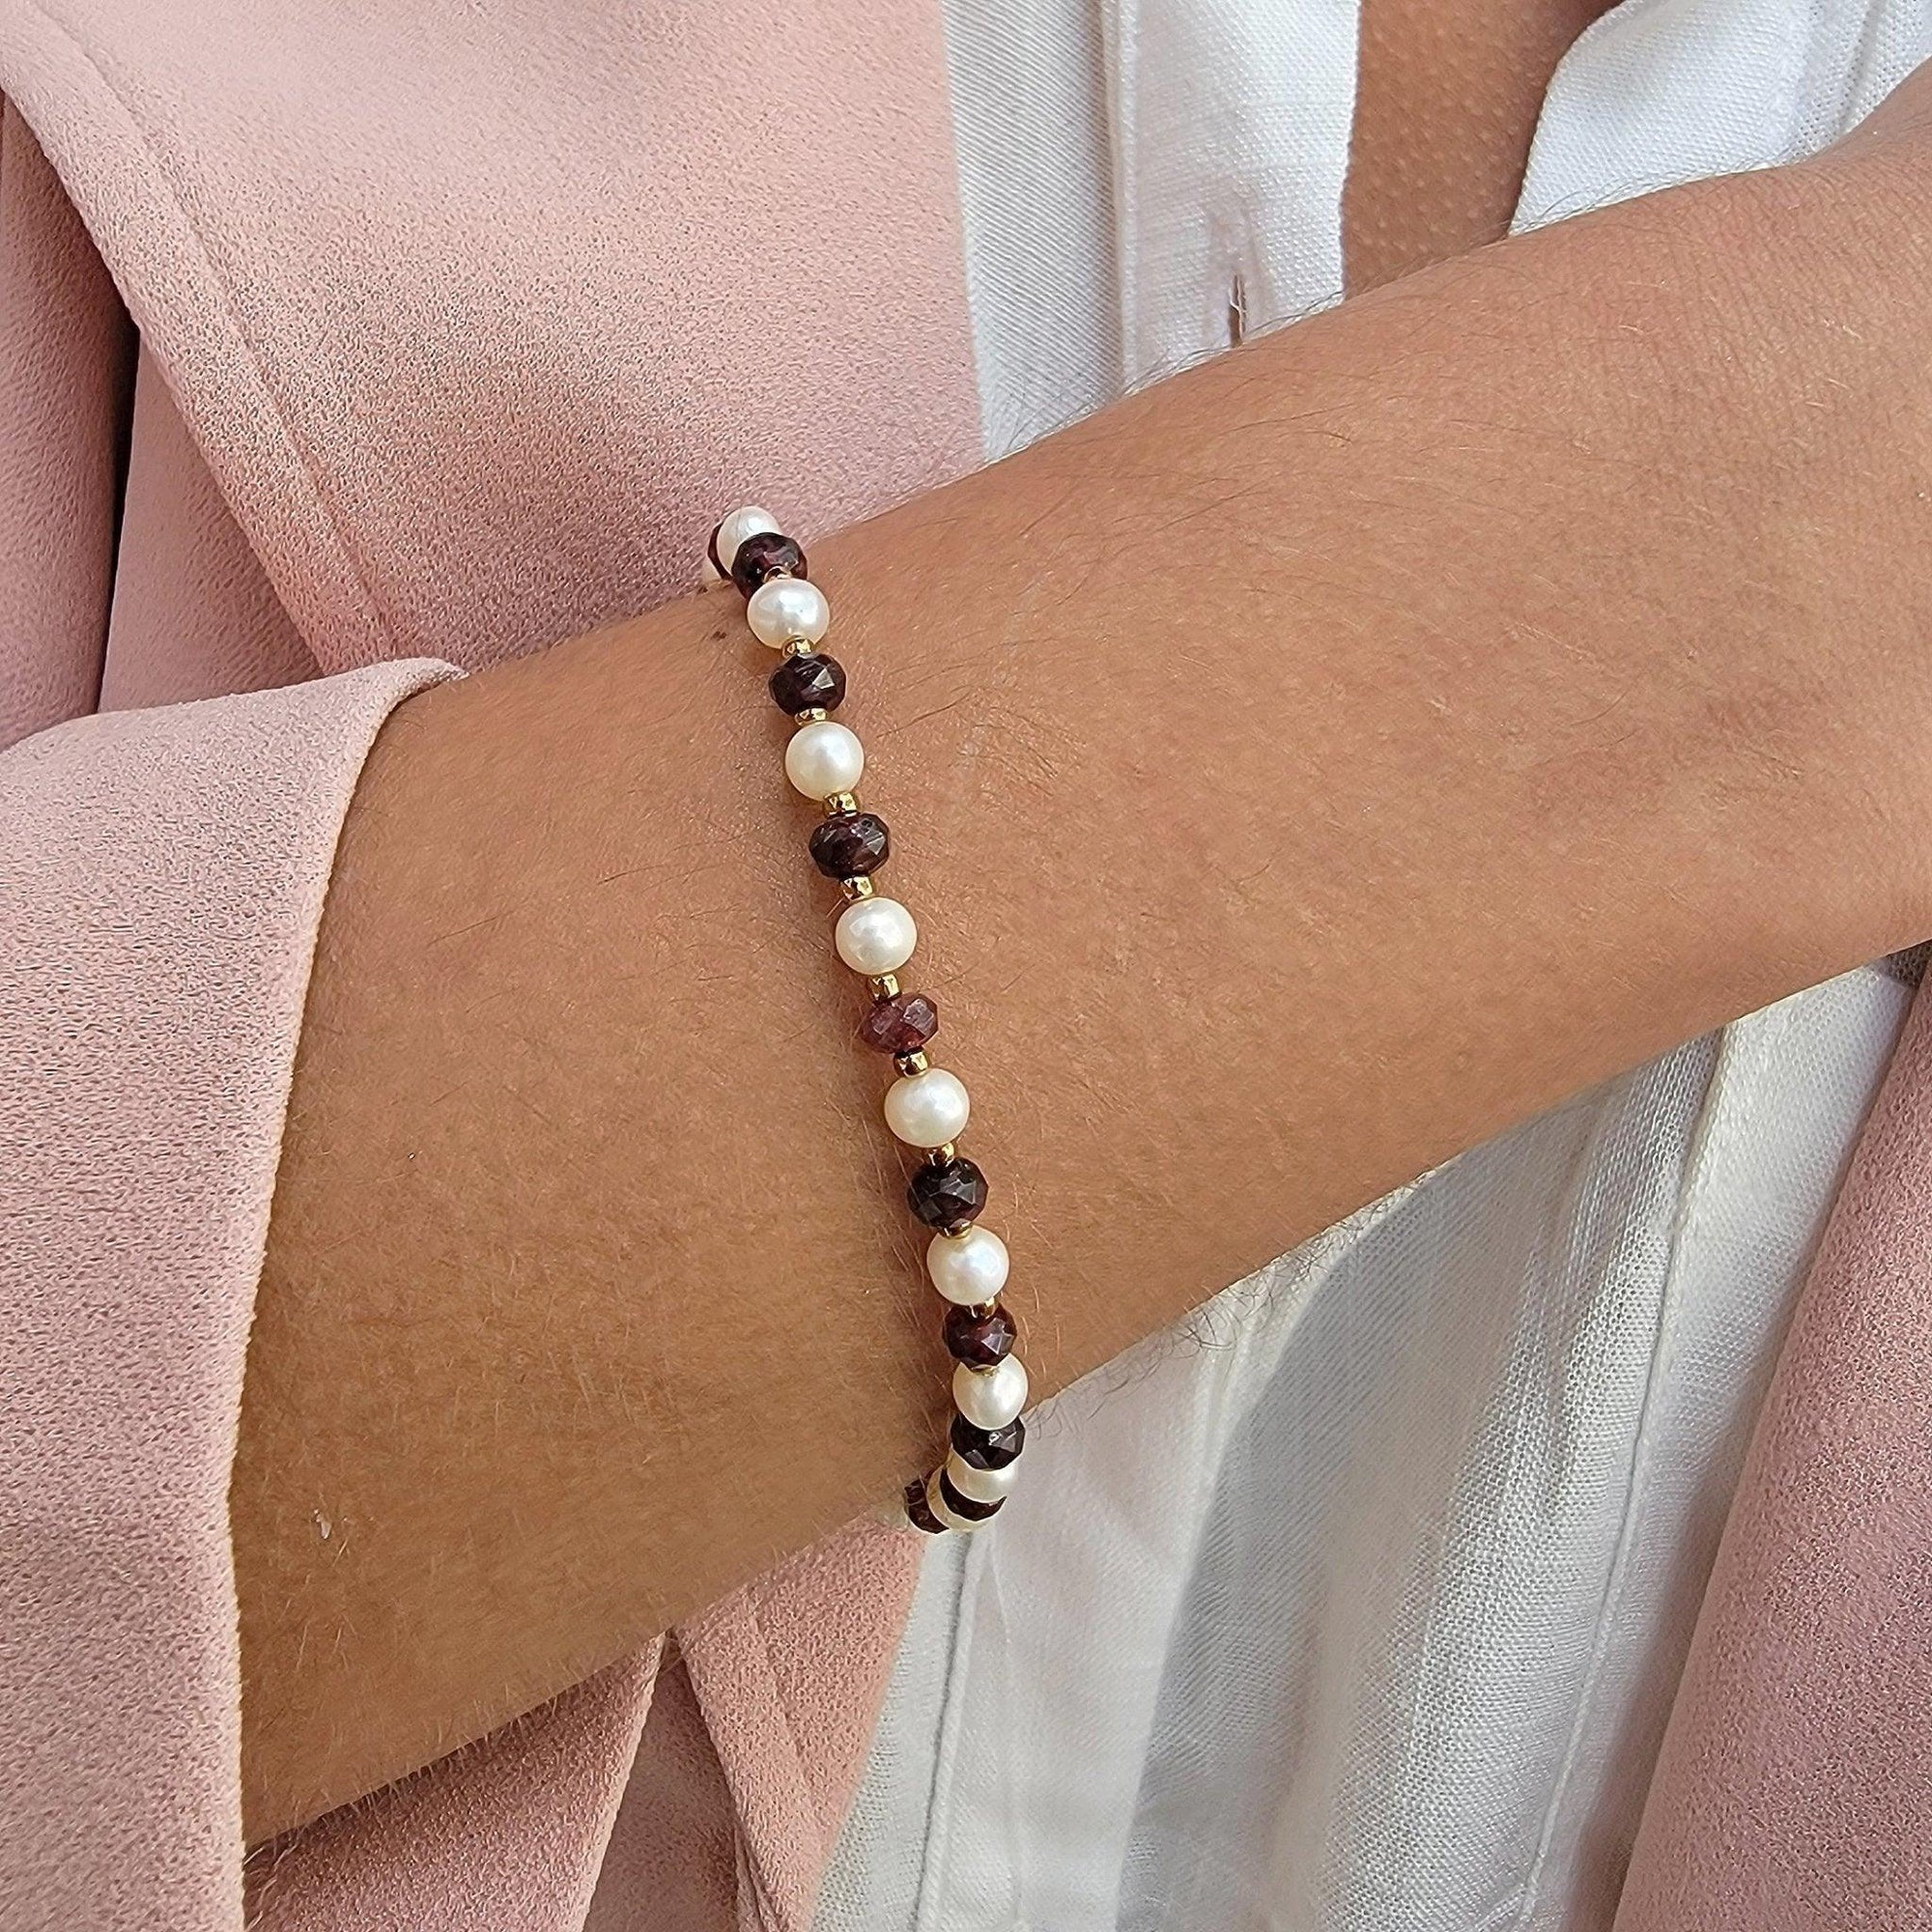 Real Garnet and Pearl Bracelet - Uniquelan Jewelry